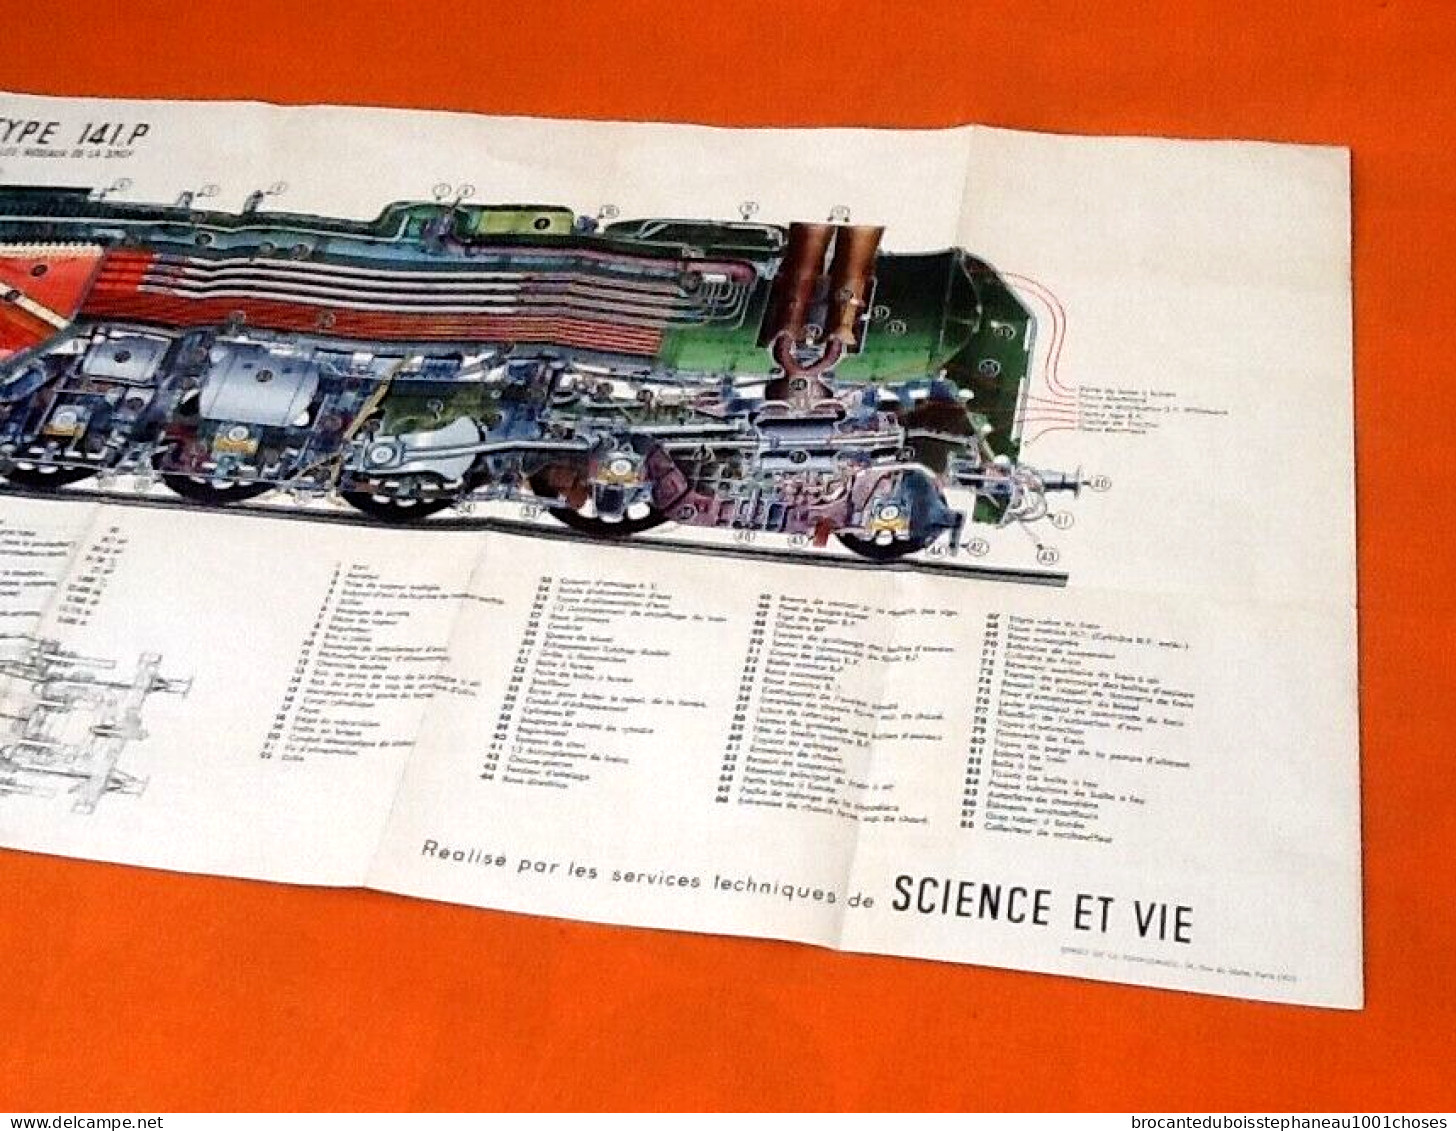 Affiche / Poster  Locomotive Type 141.P  Compund 4 Cylindres - Posters